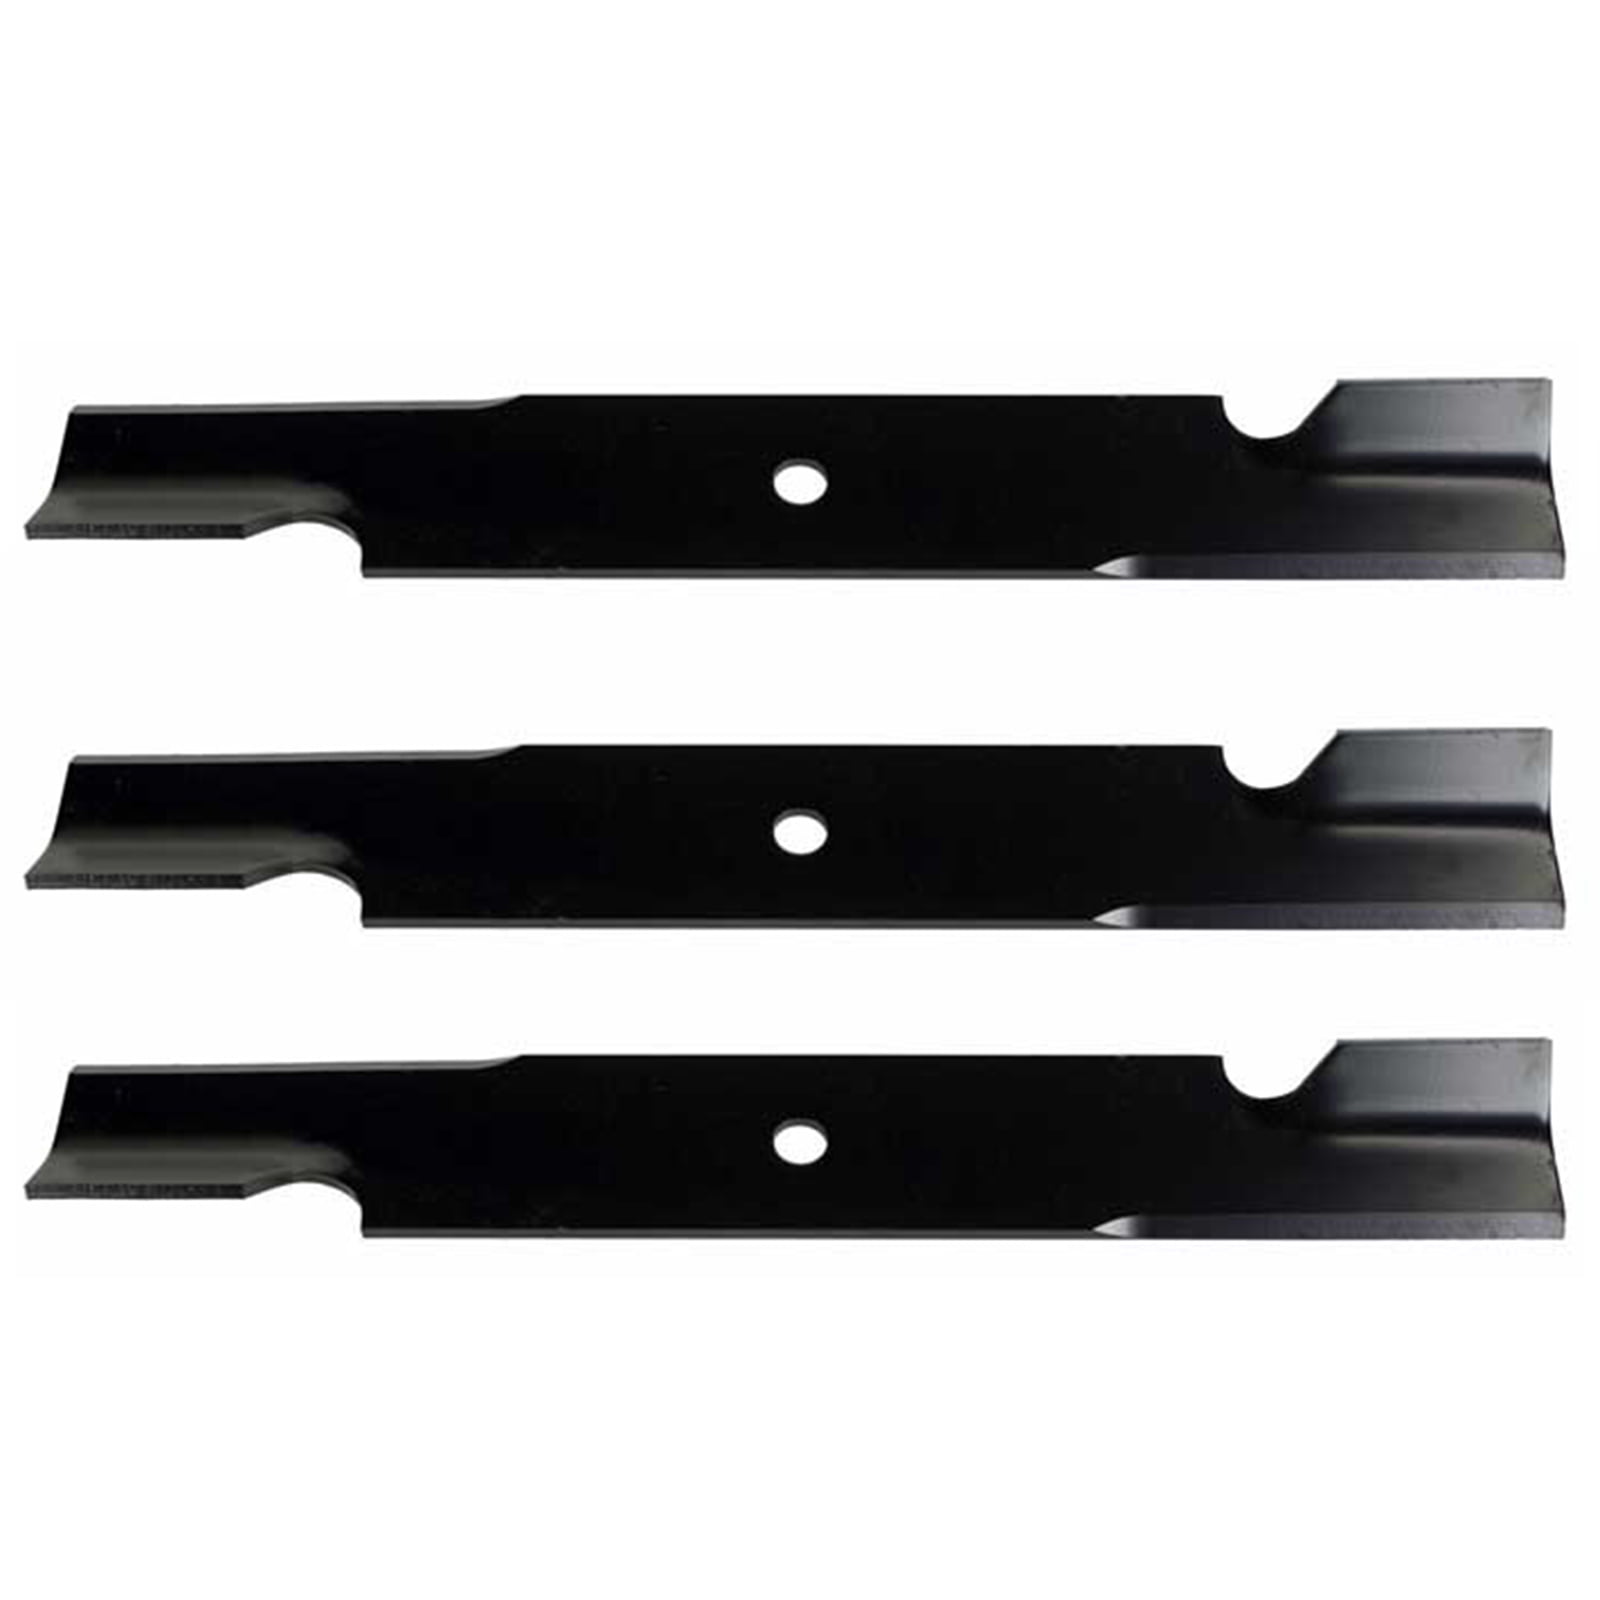 USA Mower Blades® for Kees 363245 363055 101485 100341 36" 52" Deck 3 